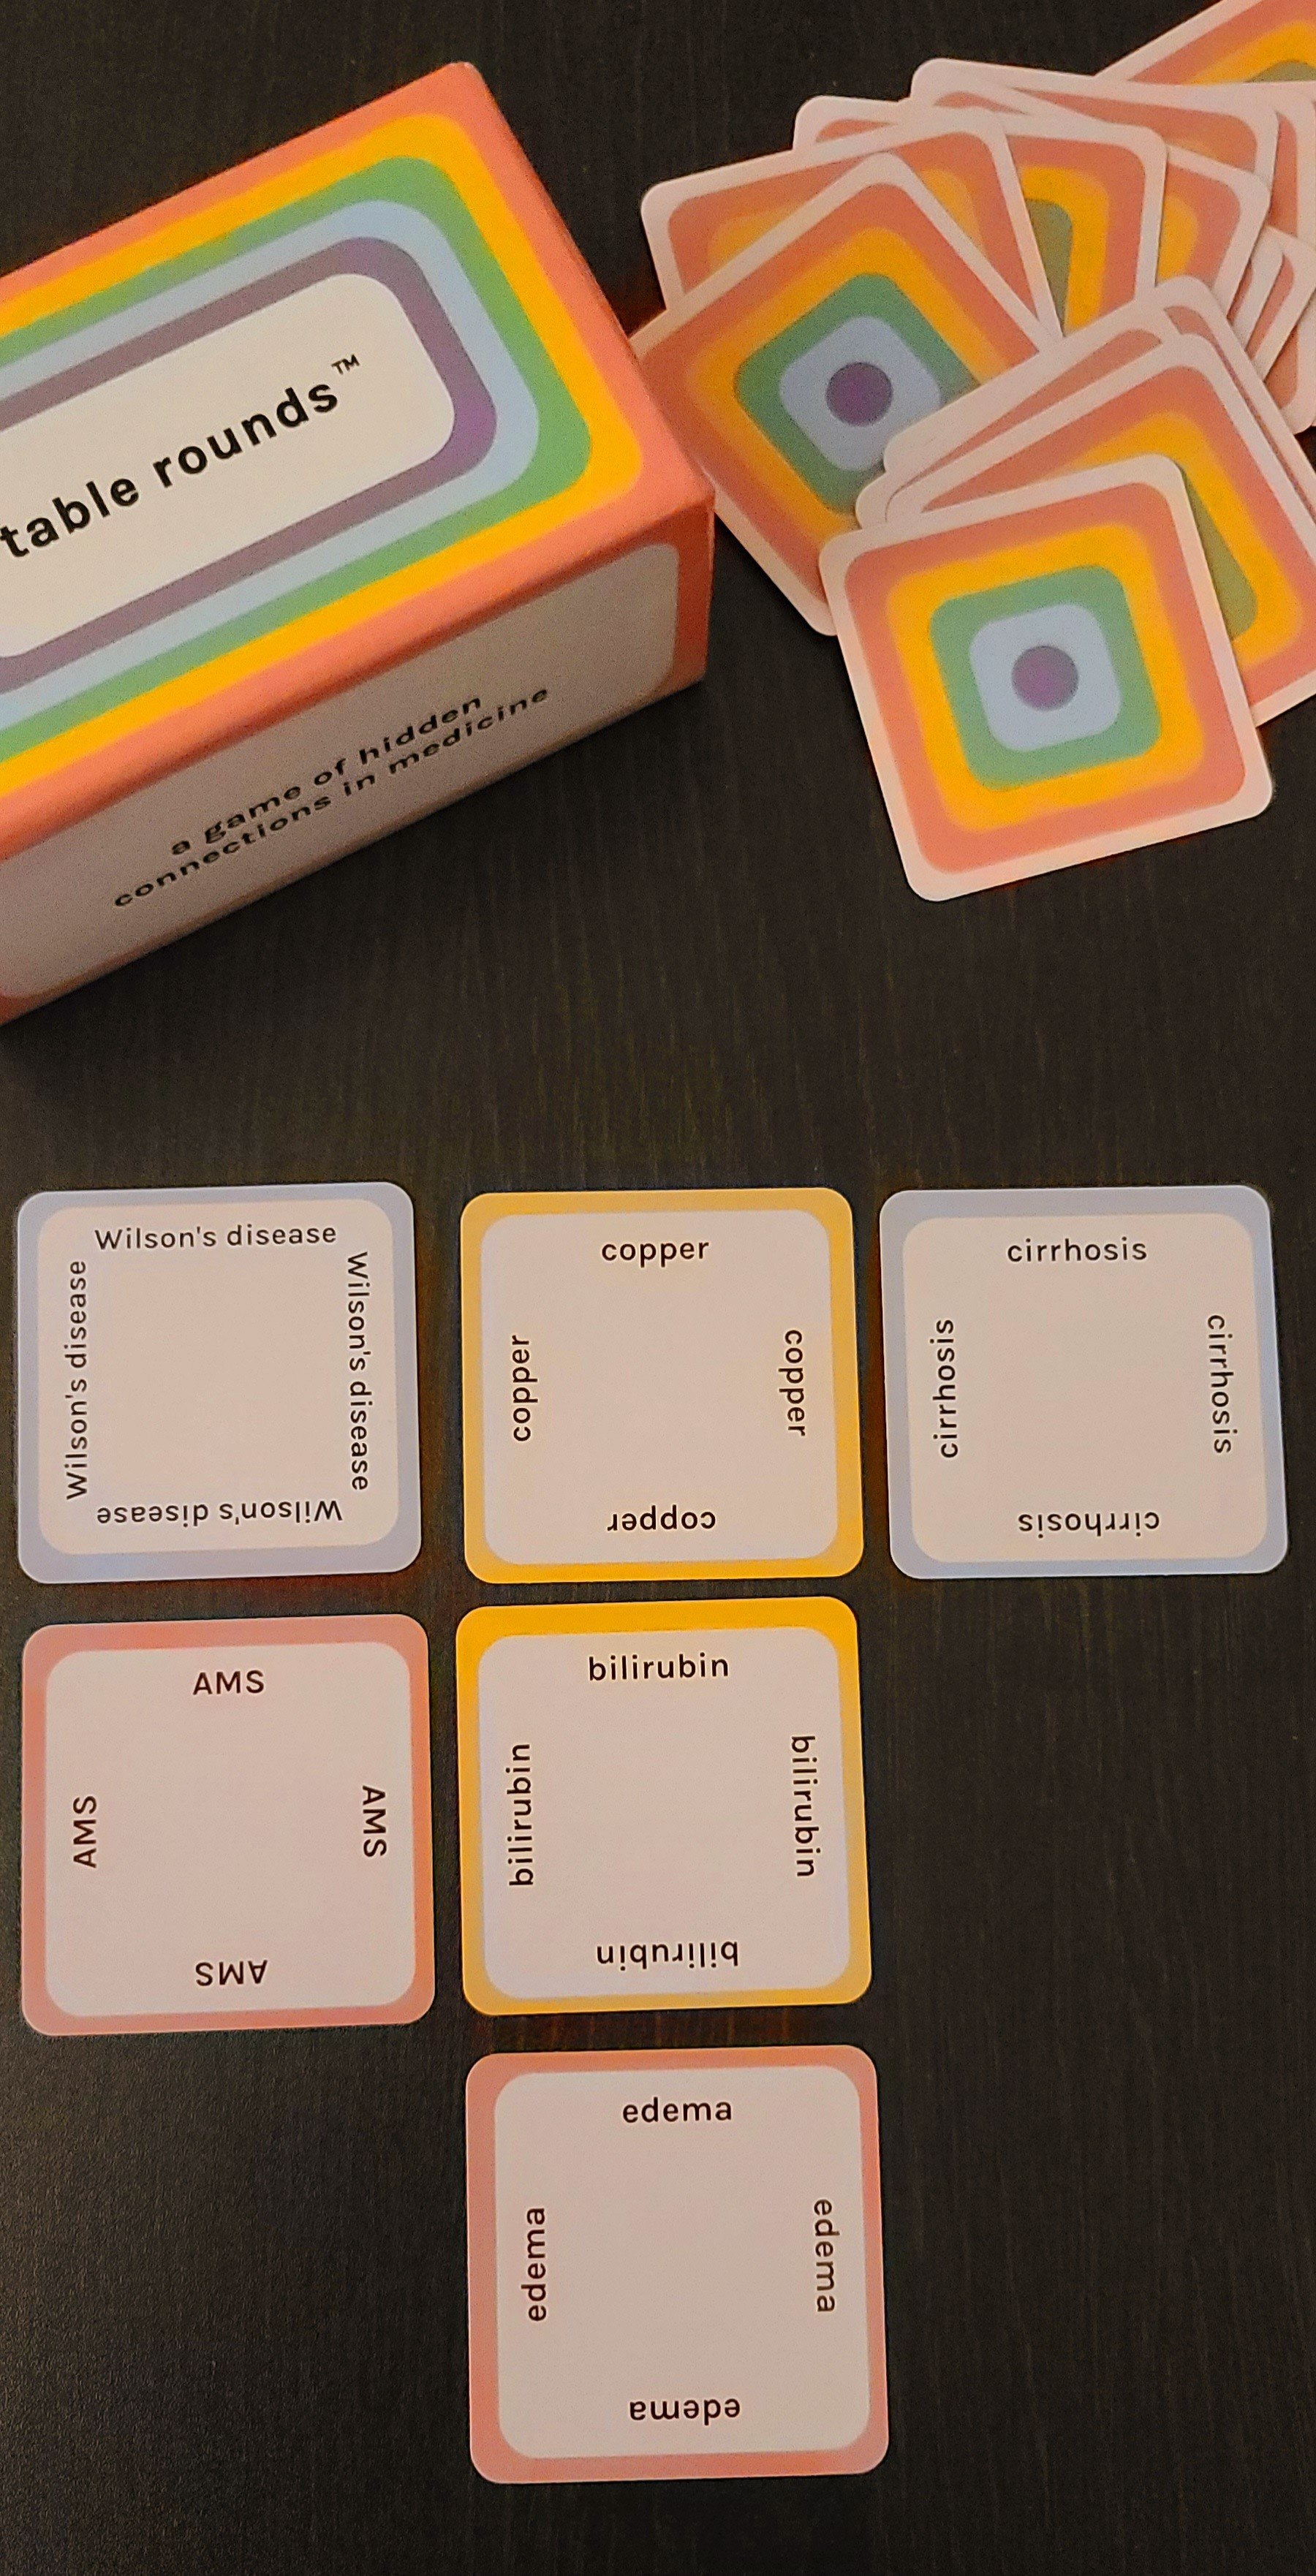 Cards from the medical education game Table Rounds are lined up on a table